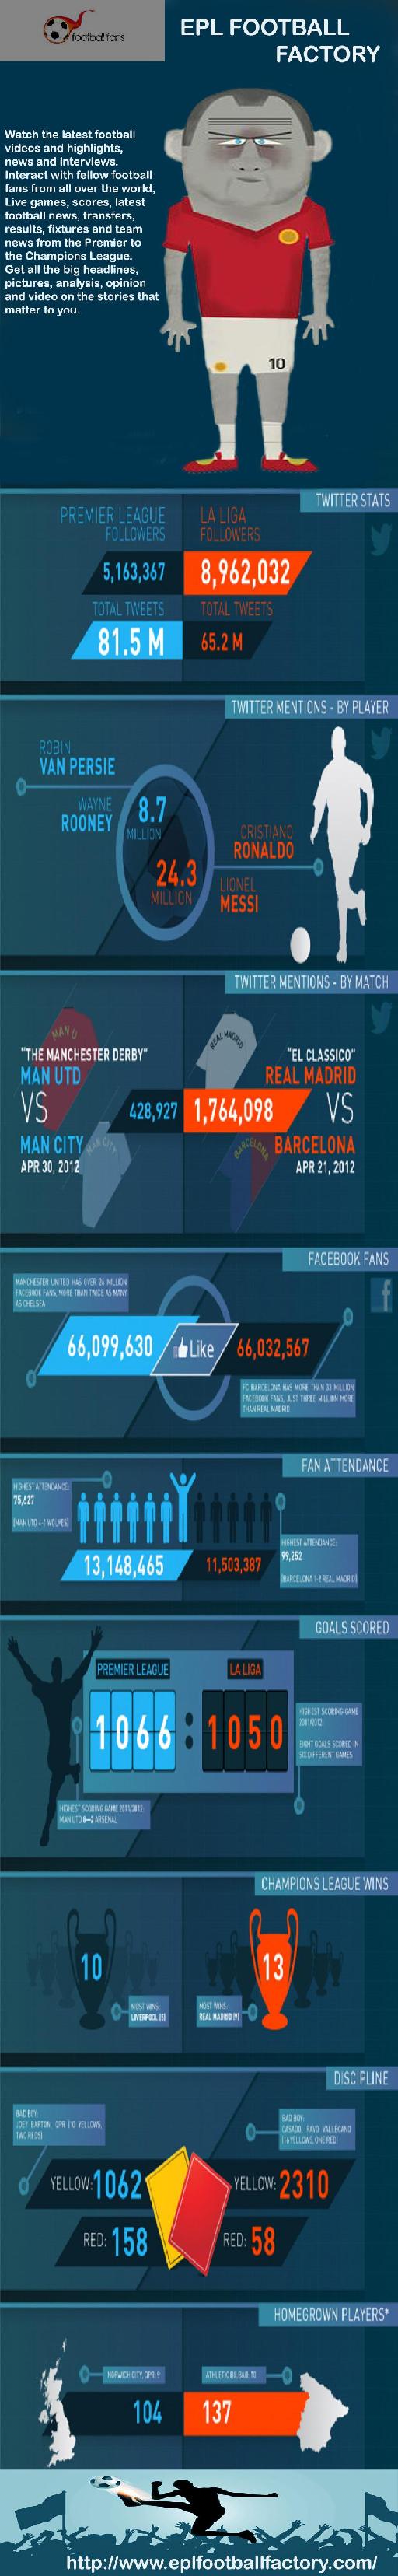 EPL FOOTBALL FACTORY INFOGRAPHICS